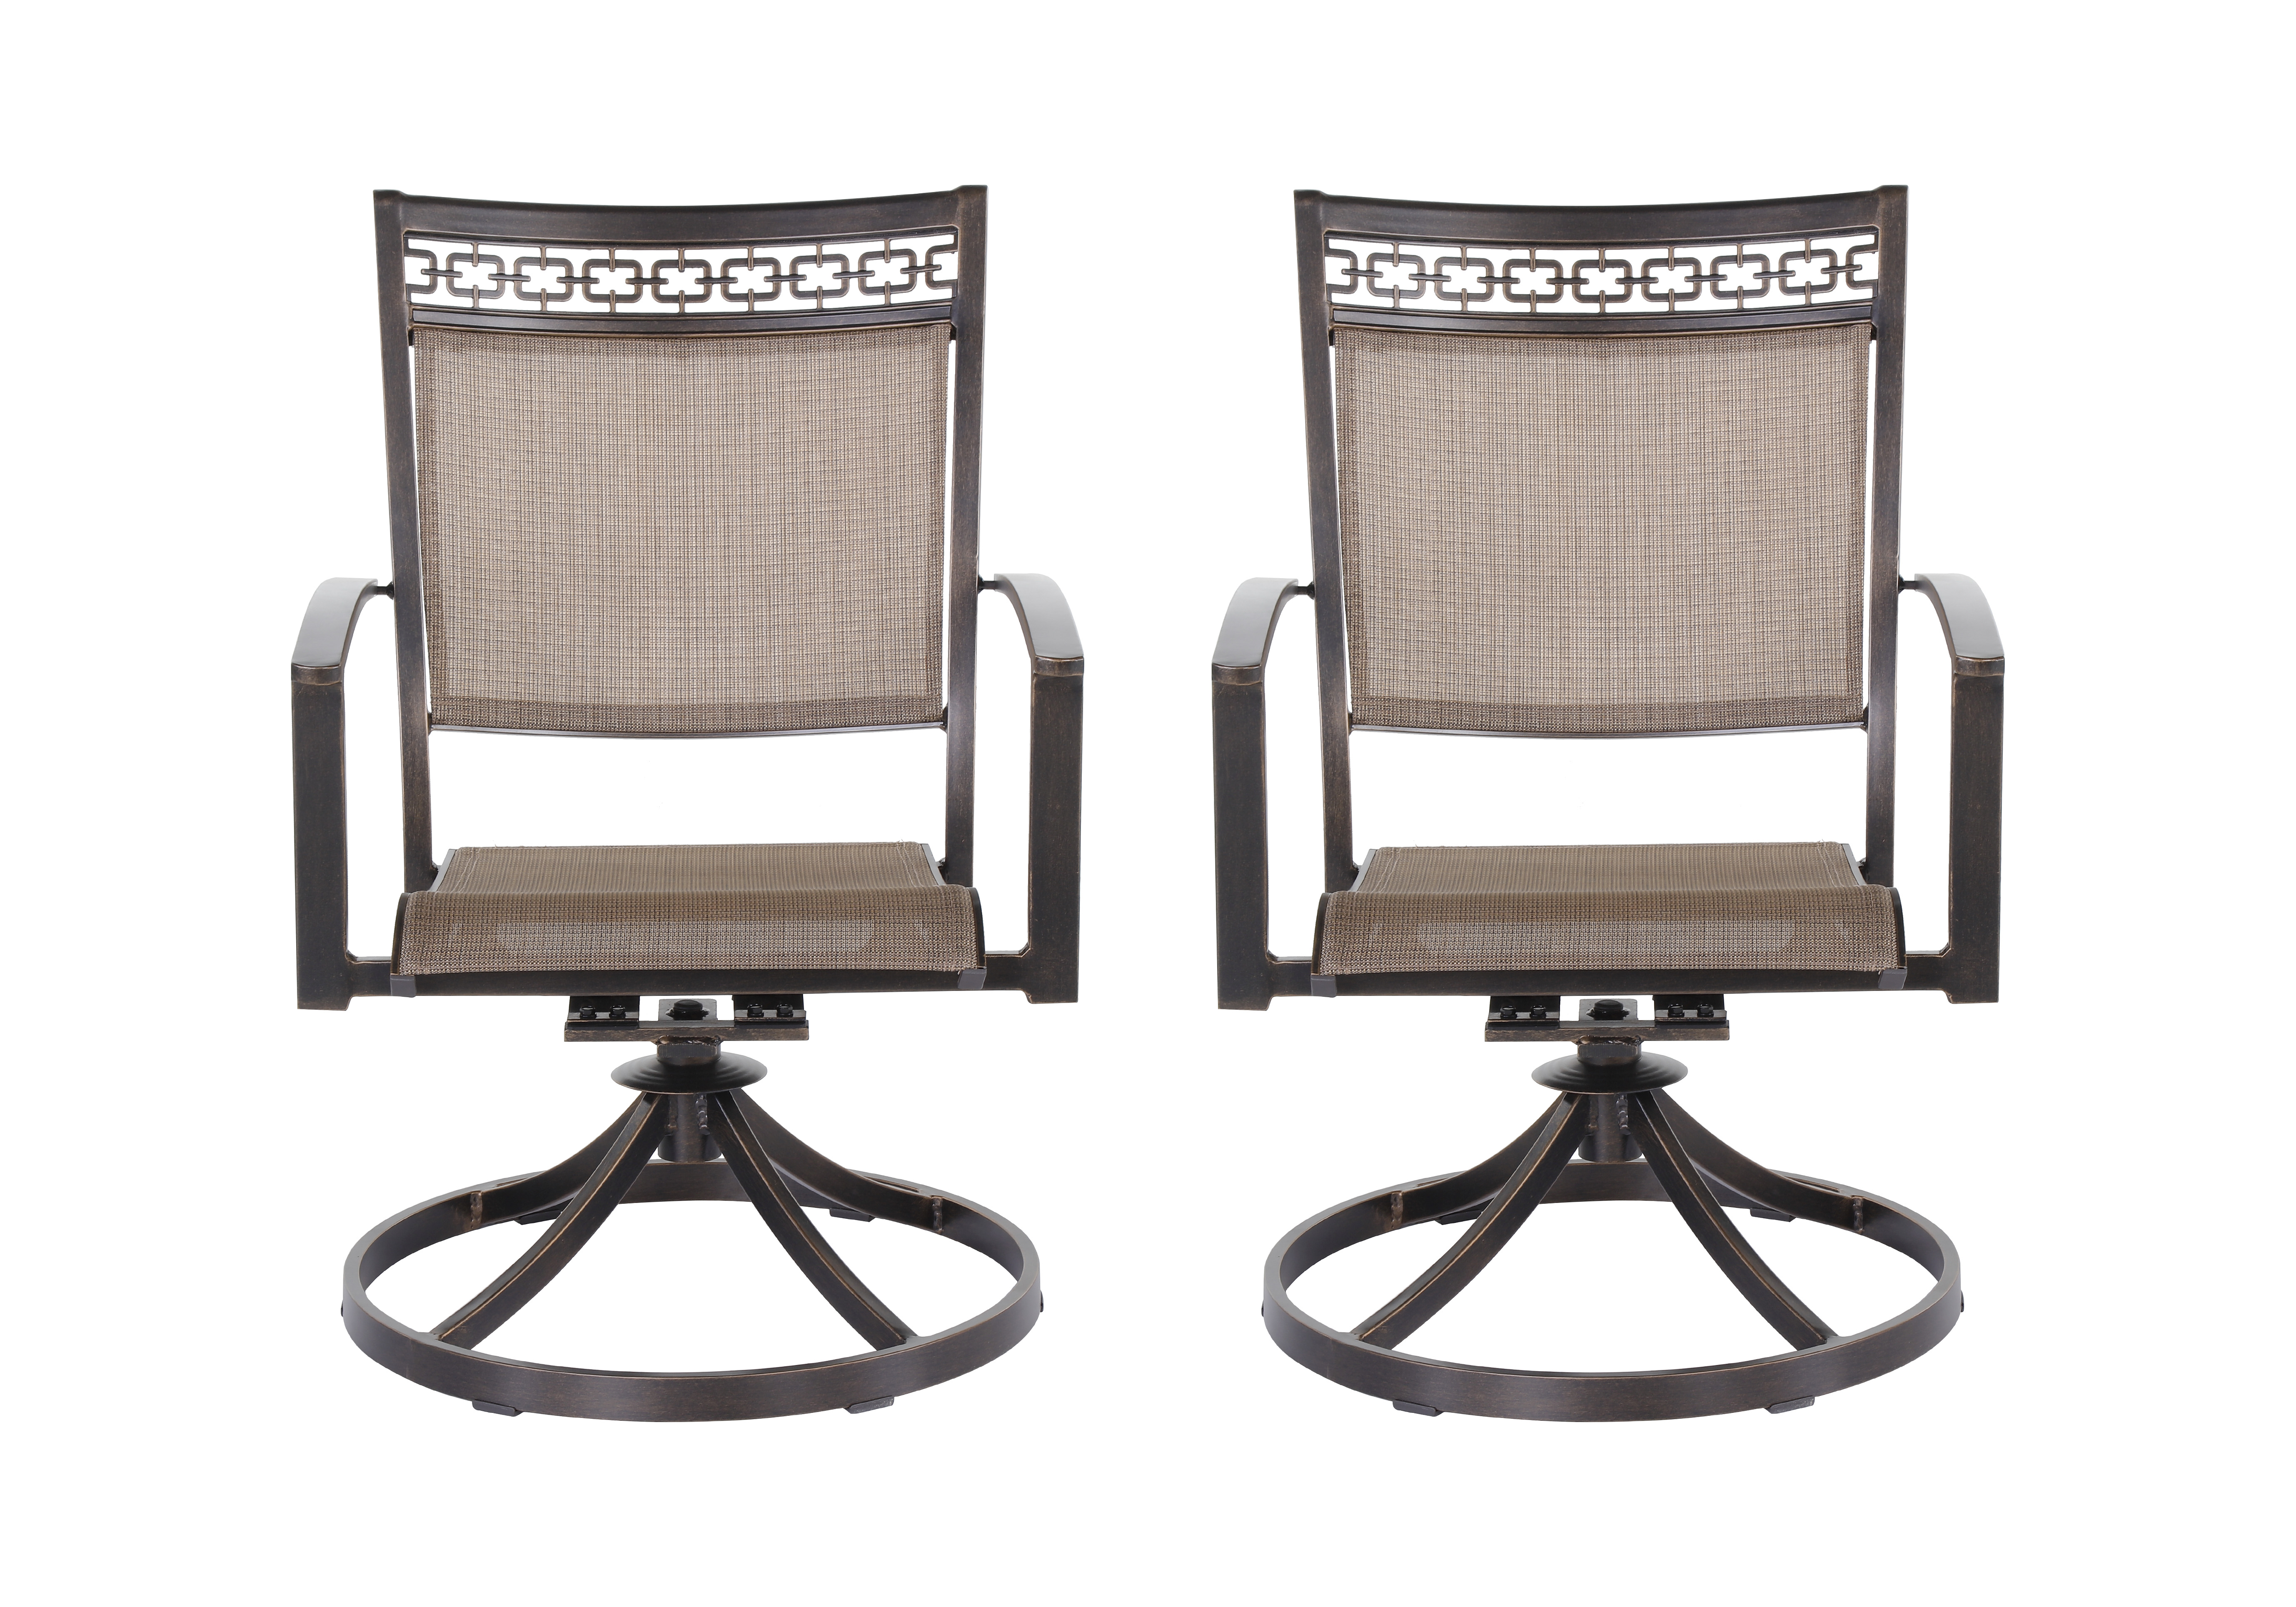 All Weather Patio Dining Chair, Sling Fabric Swivel Rocker With Rustproof Finish Aluminum Frame, Outdoor Garden Furniture 2 Pieces Sets - image 1 of 11